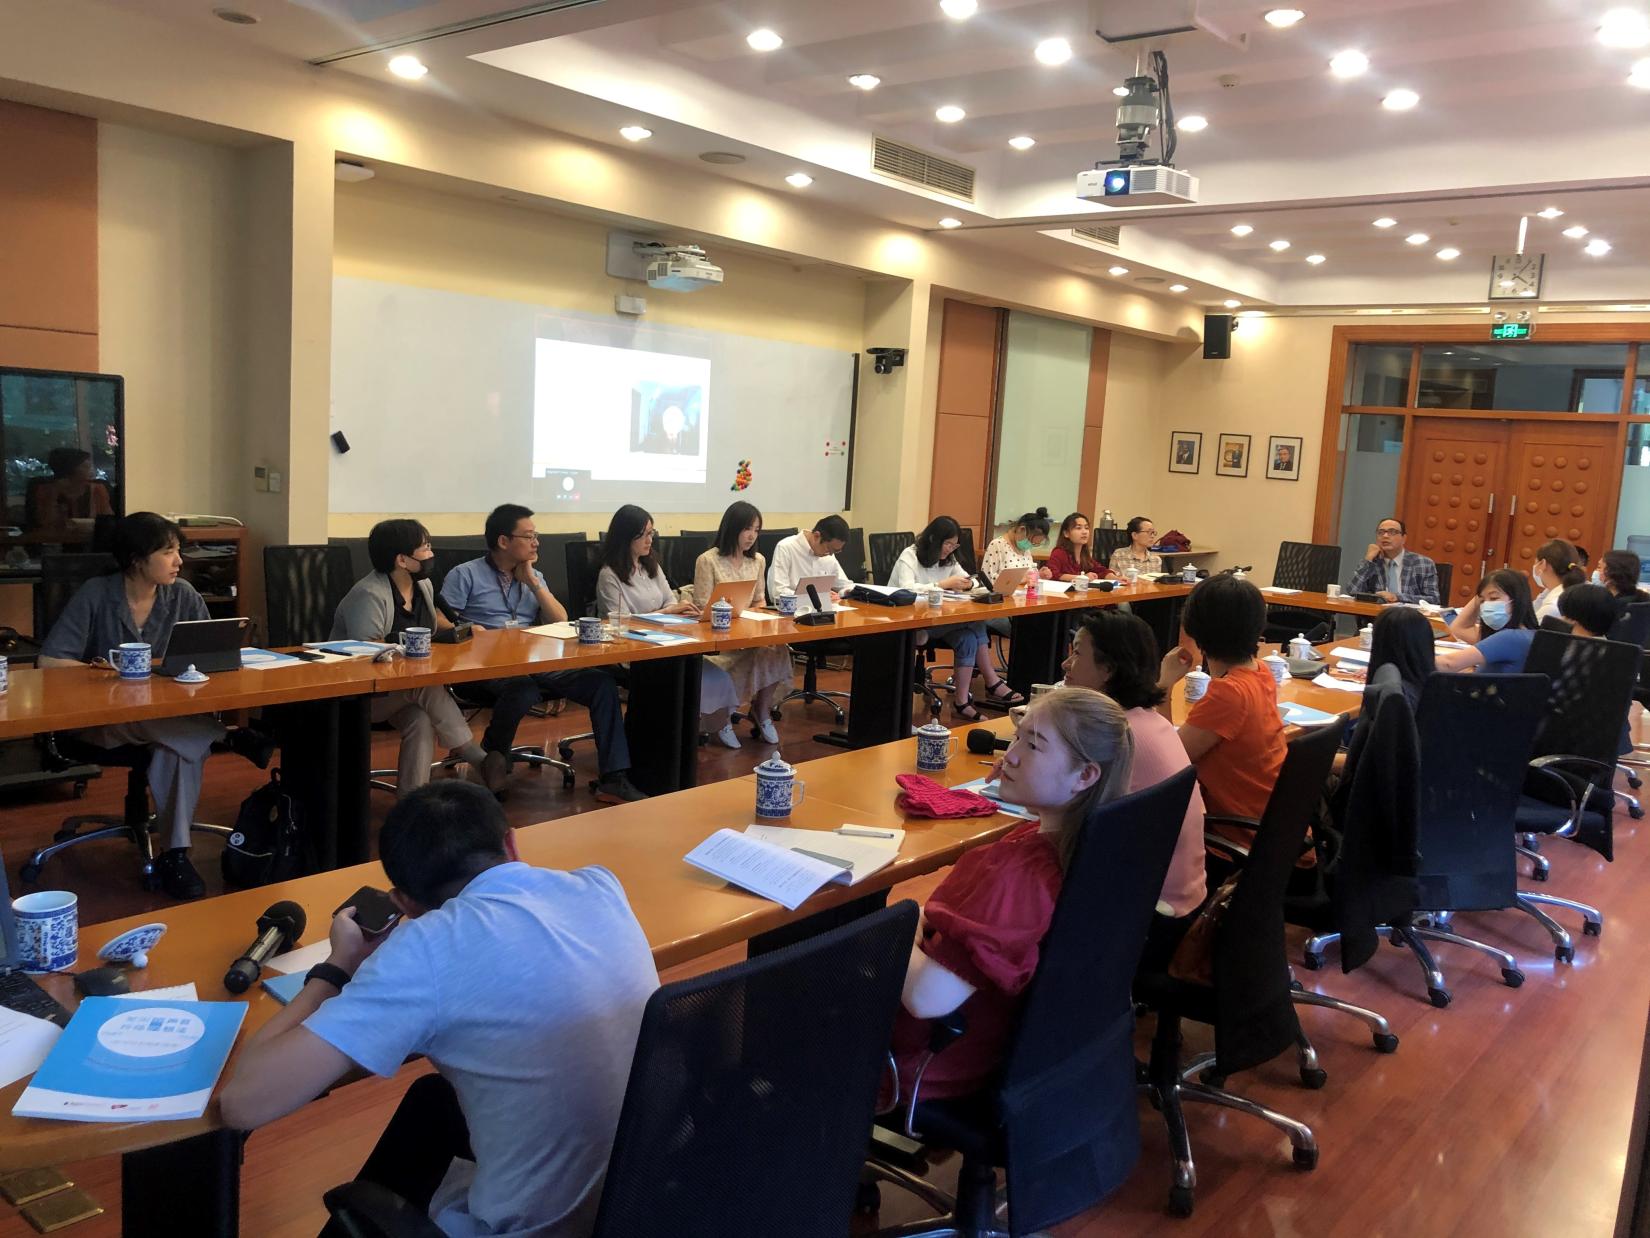 The United Nations Theme Group on Disability meet to discuss ways to further advance inclusion of persons with disabilities in China